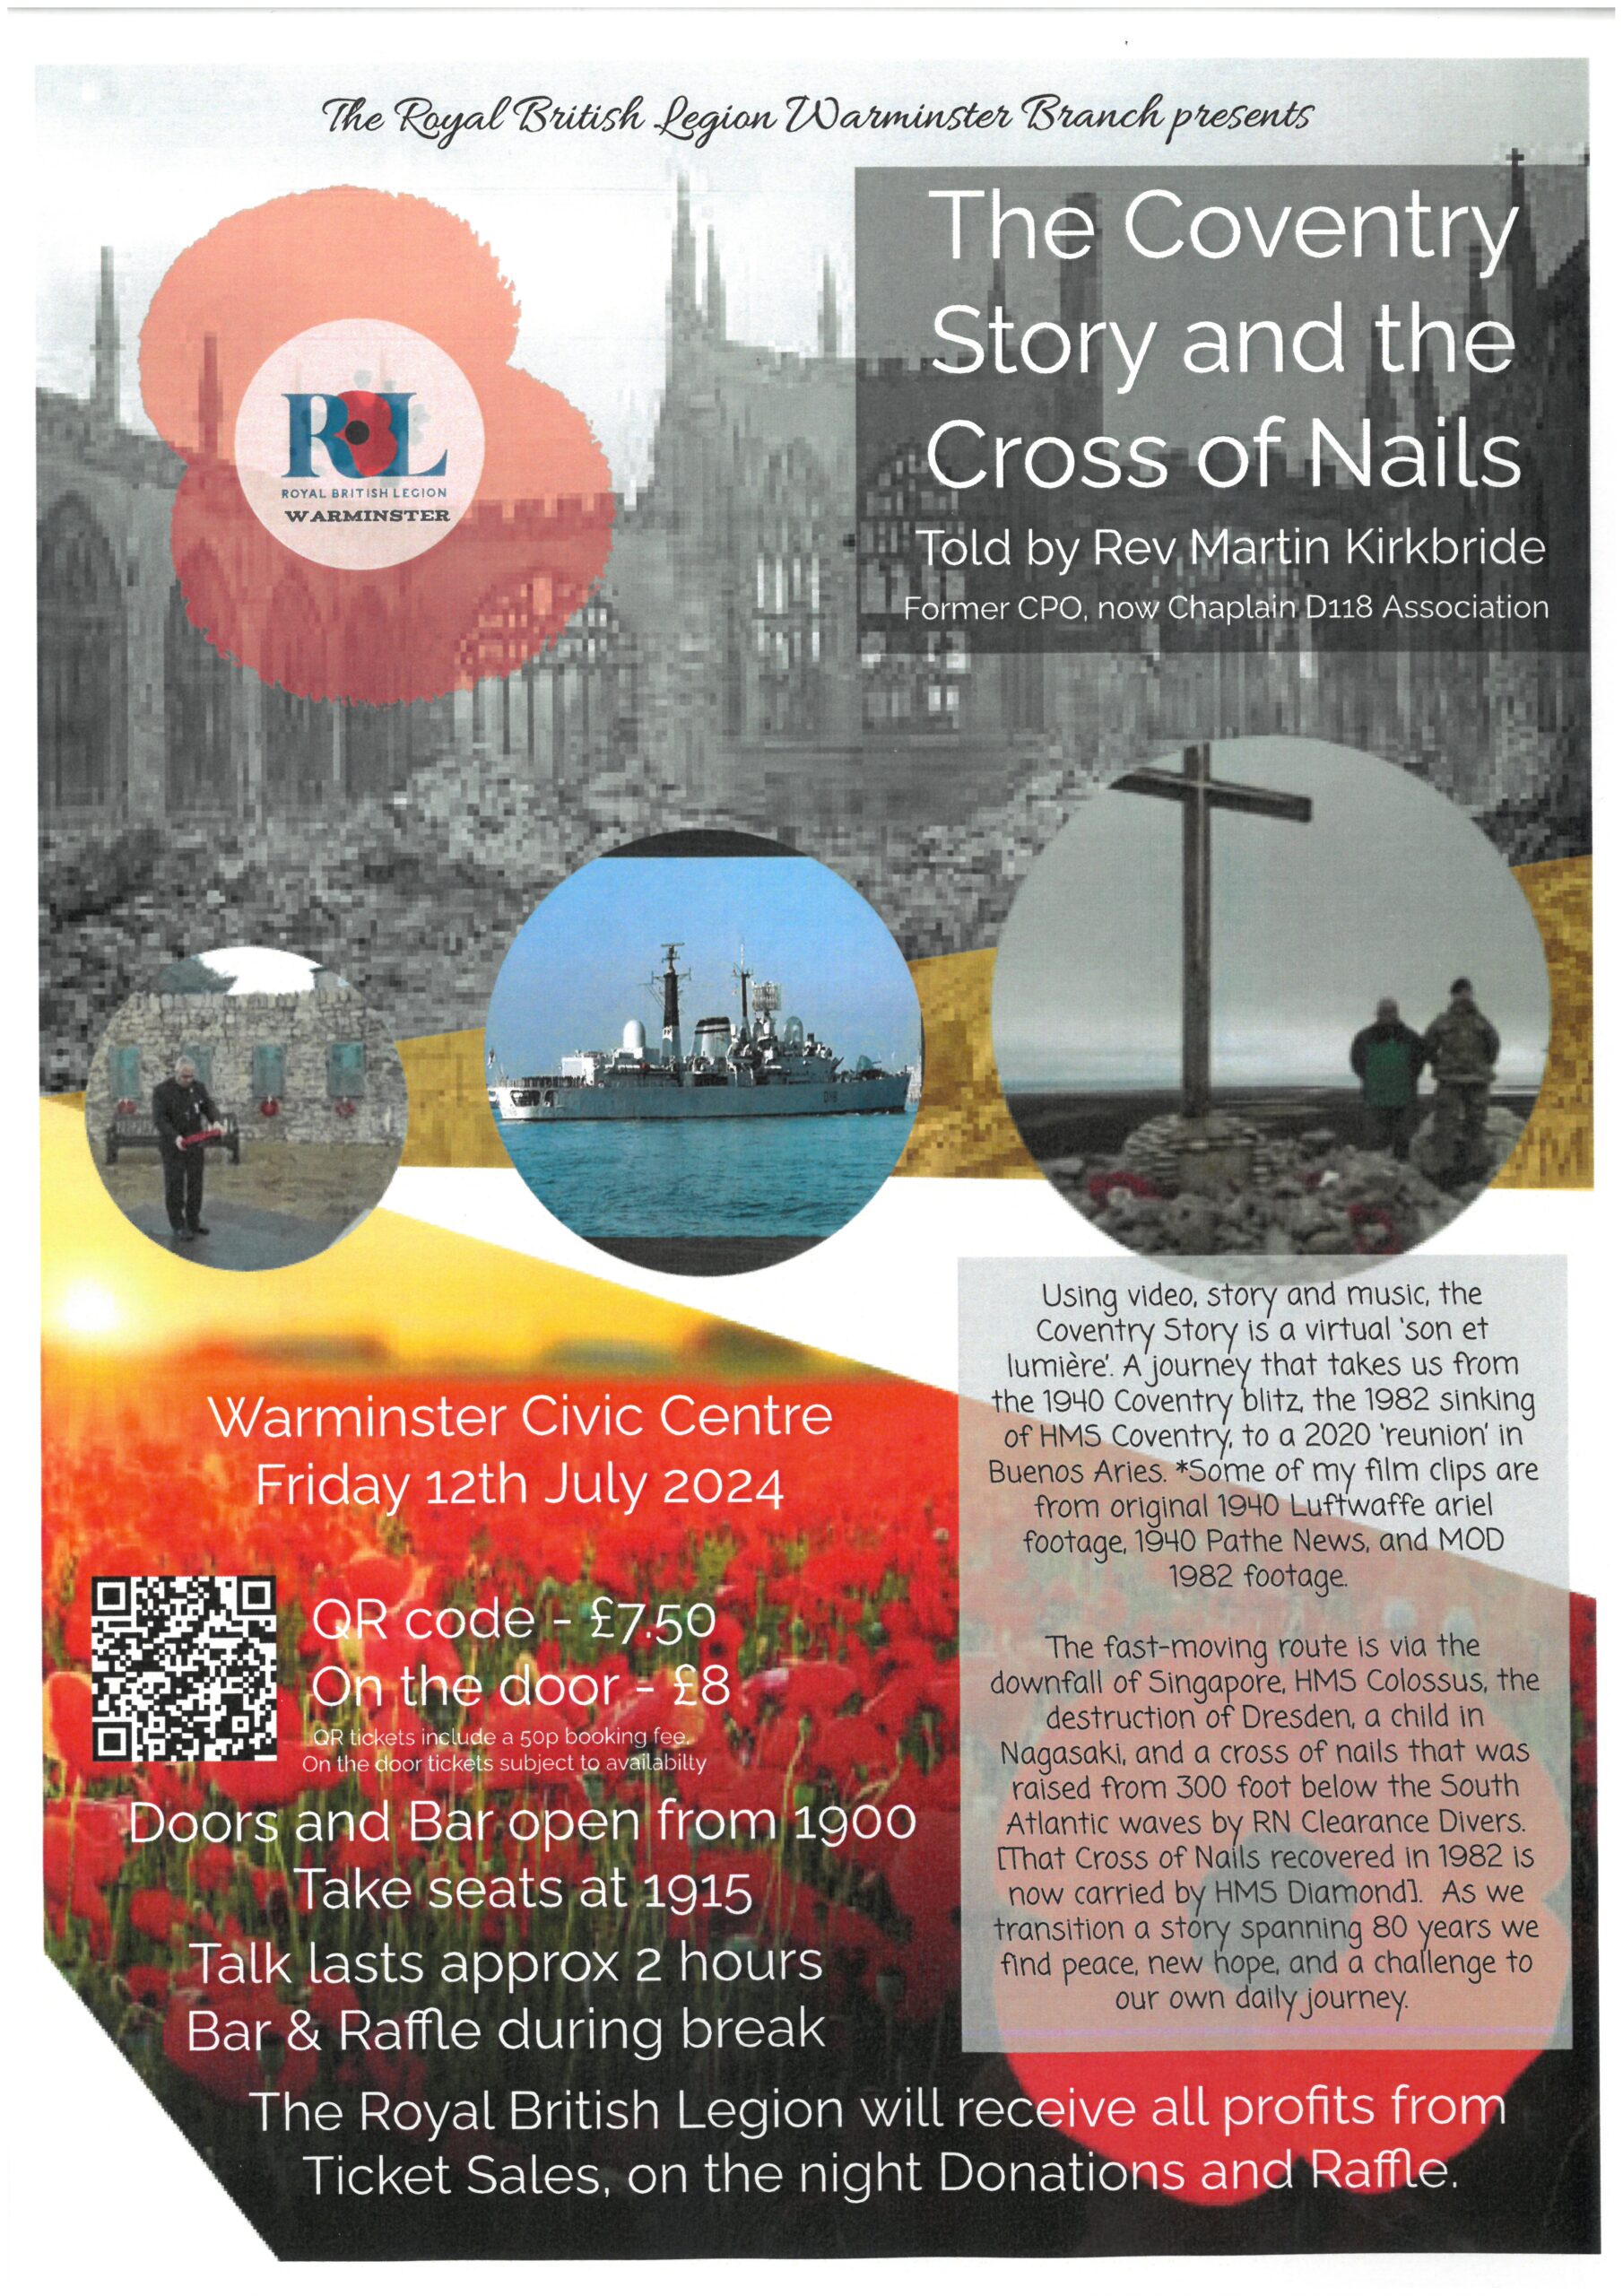 The Coventry Story and the Cross of Nails